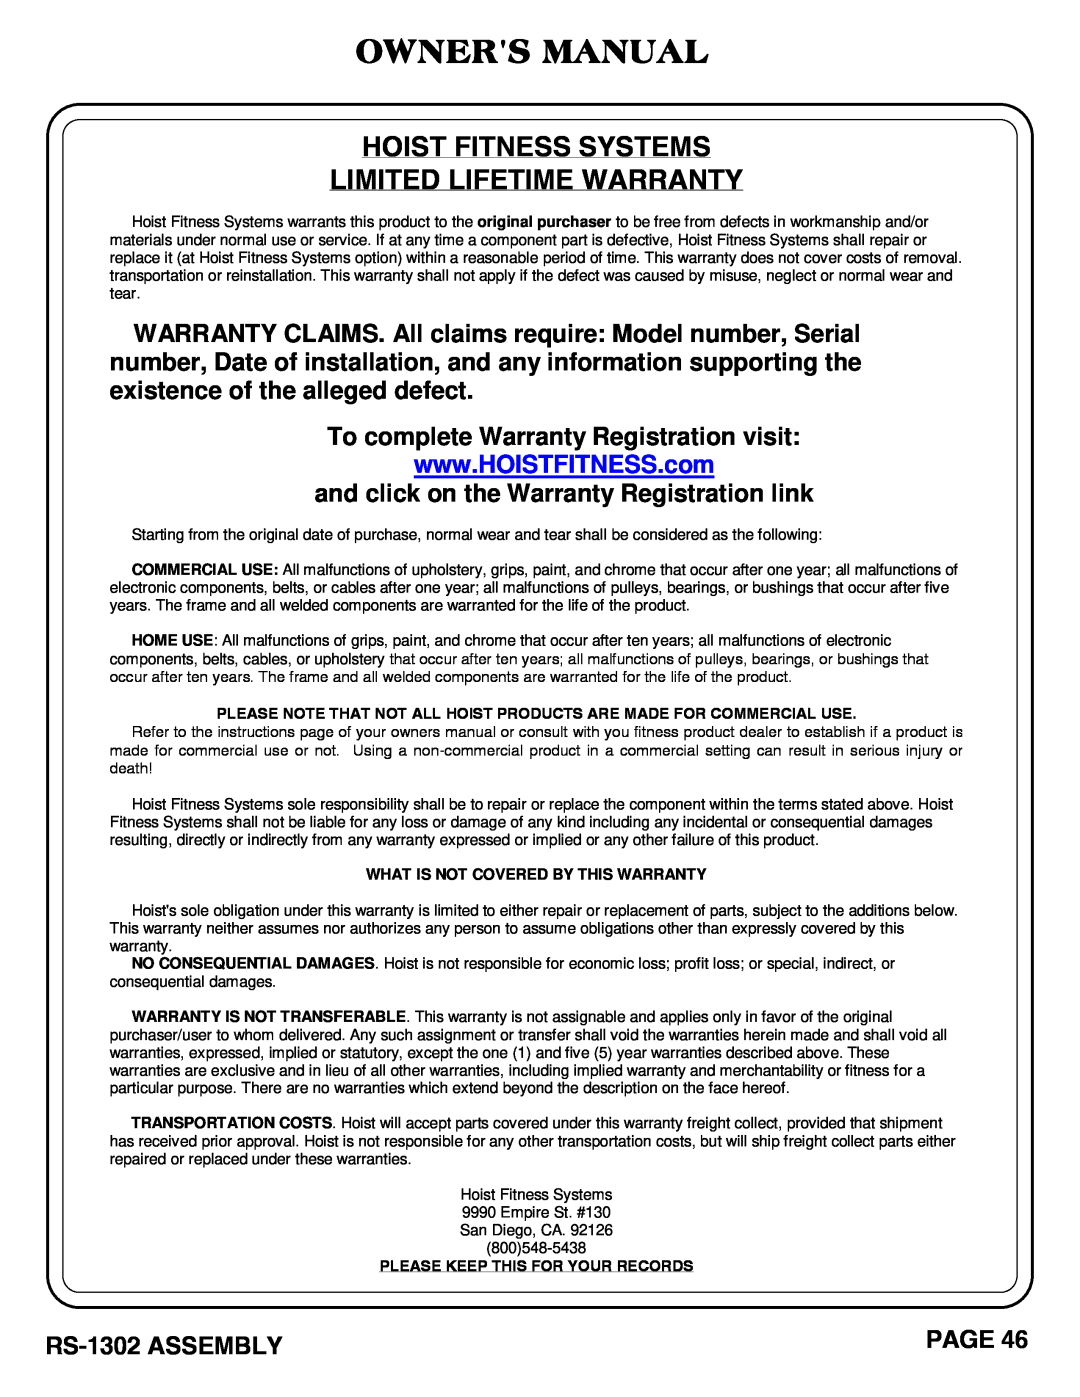 Hoist Fitness RS-1302 owner manual Owners Manual, Hoist Fitness Systems Limited Lifetime Warranty, Page 